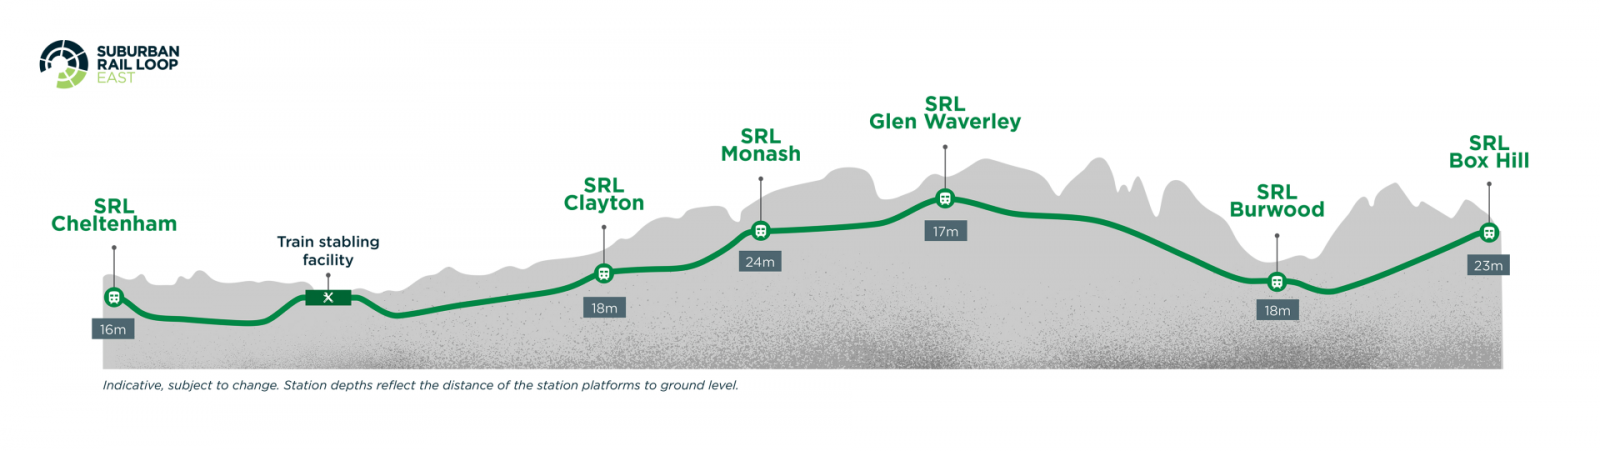 Diagram: SRL East station locations underground - from Cheltenham to Box Hill